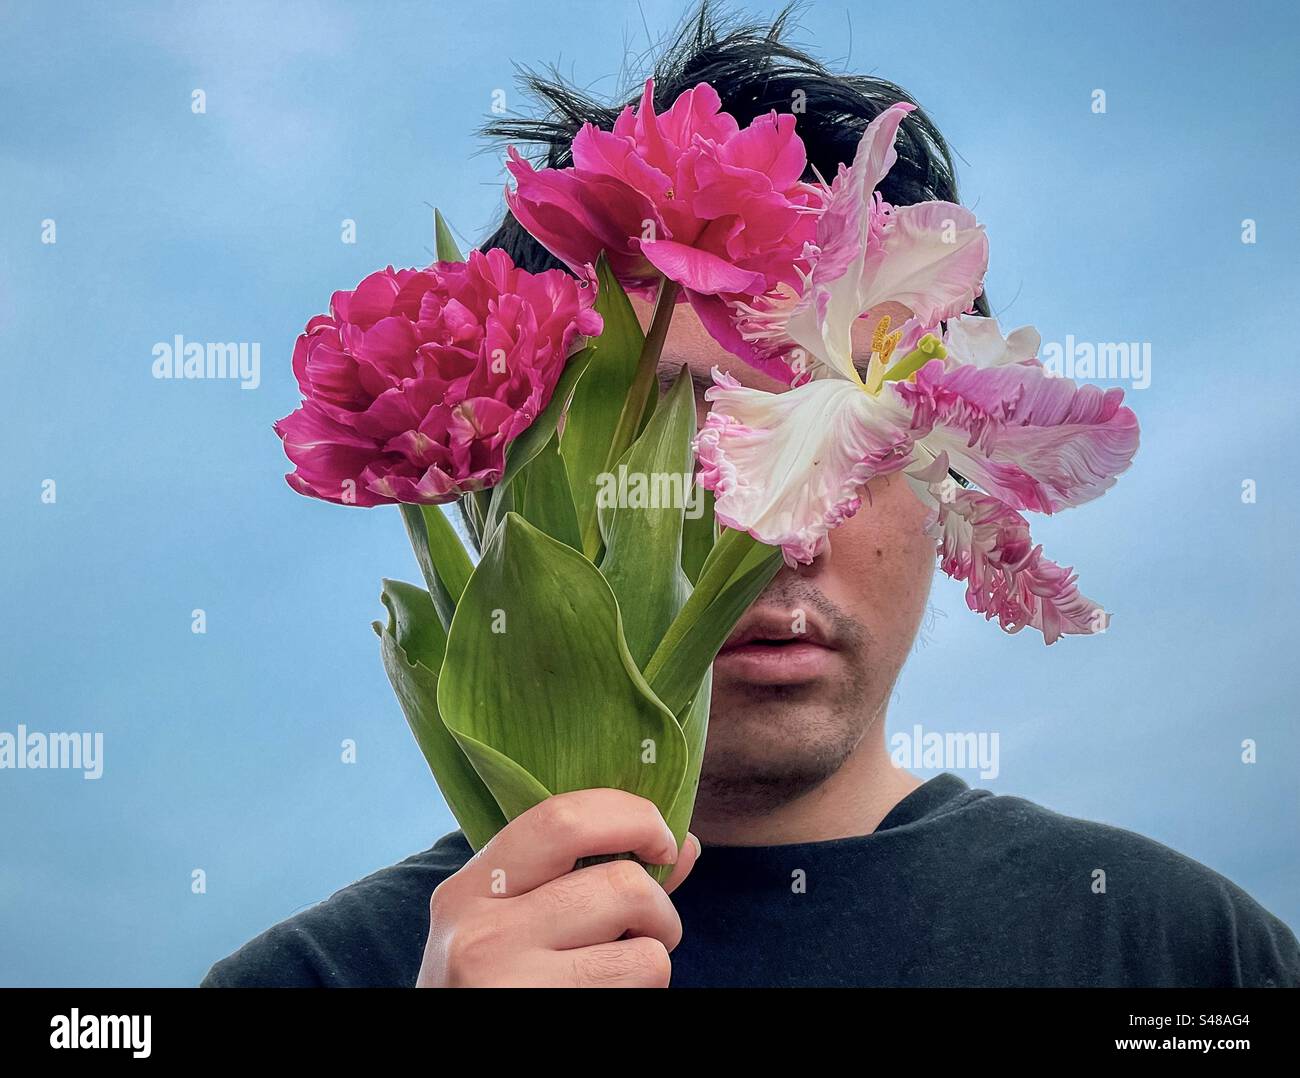 Young man holding a bouquet of pink, double and parrot tulips in front of his face against blue sky. Obscured face. Springtime theme. Stock Photo